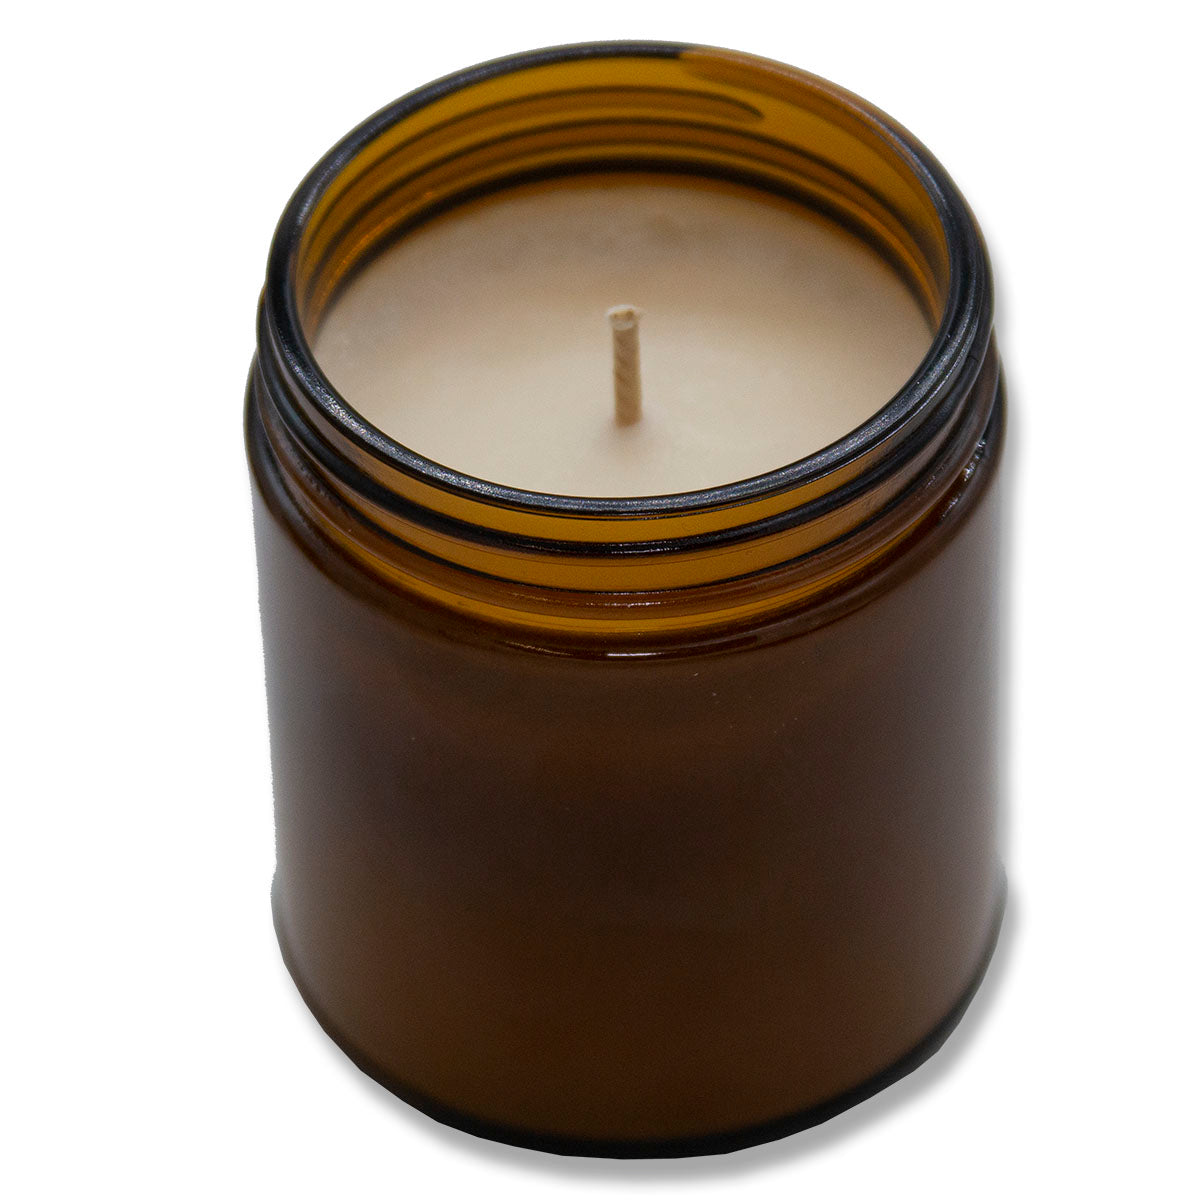 Cinnamon Vanilla, Lone Star Candles & More's Premium Hand Poured Strong Scented Soy Wax Gift Candle, Ground Cinnamon & Sweet Vanilla Bean, US Made in Texas, Round Amber Glass Jars, 9oz Merry Christmas